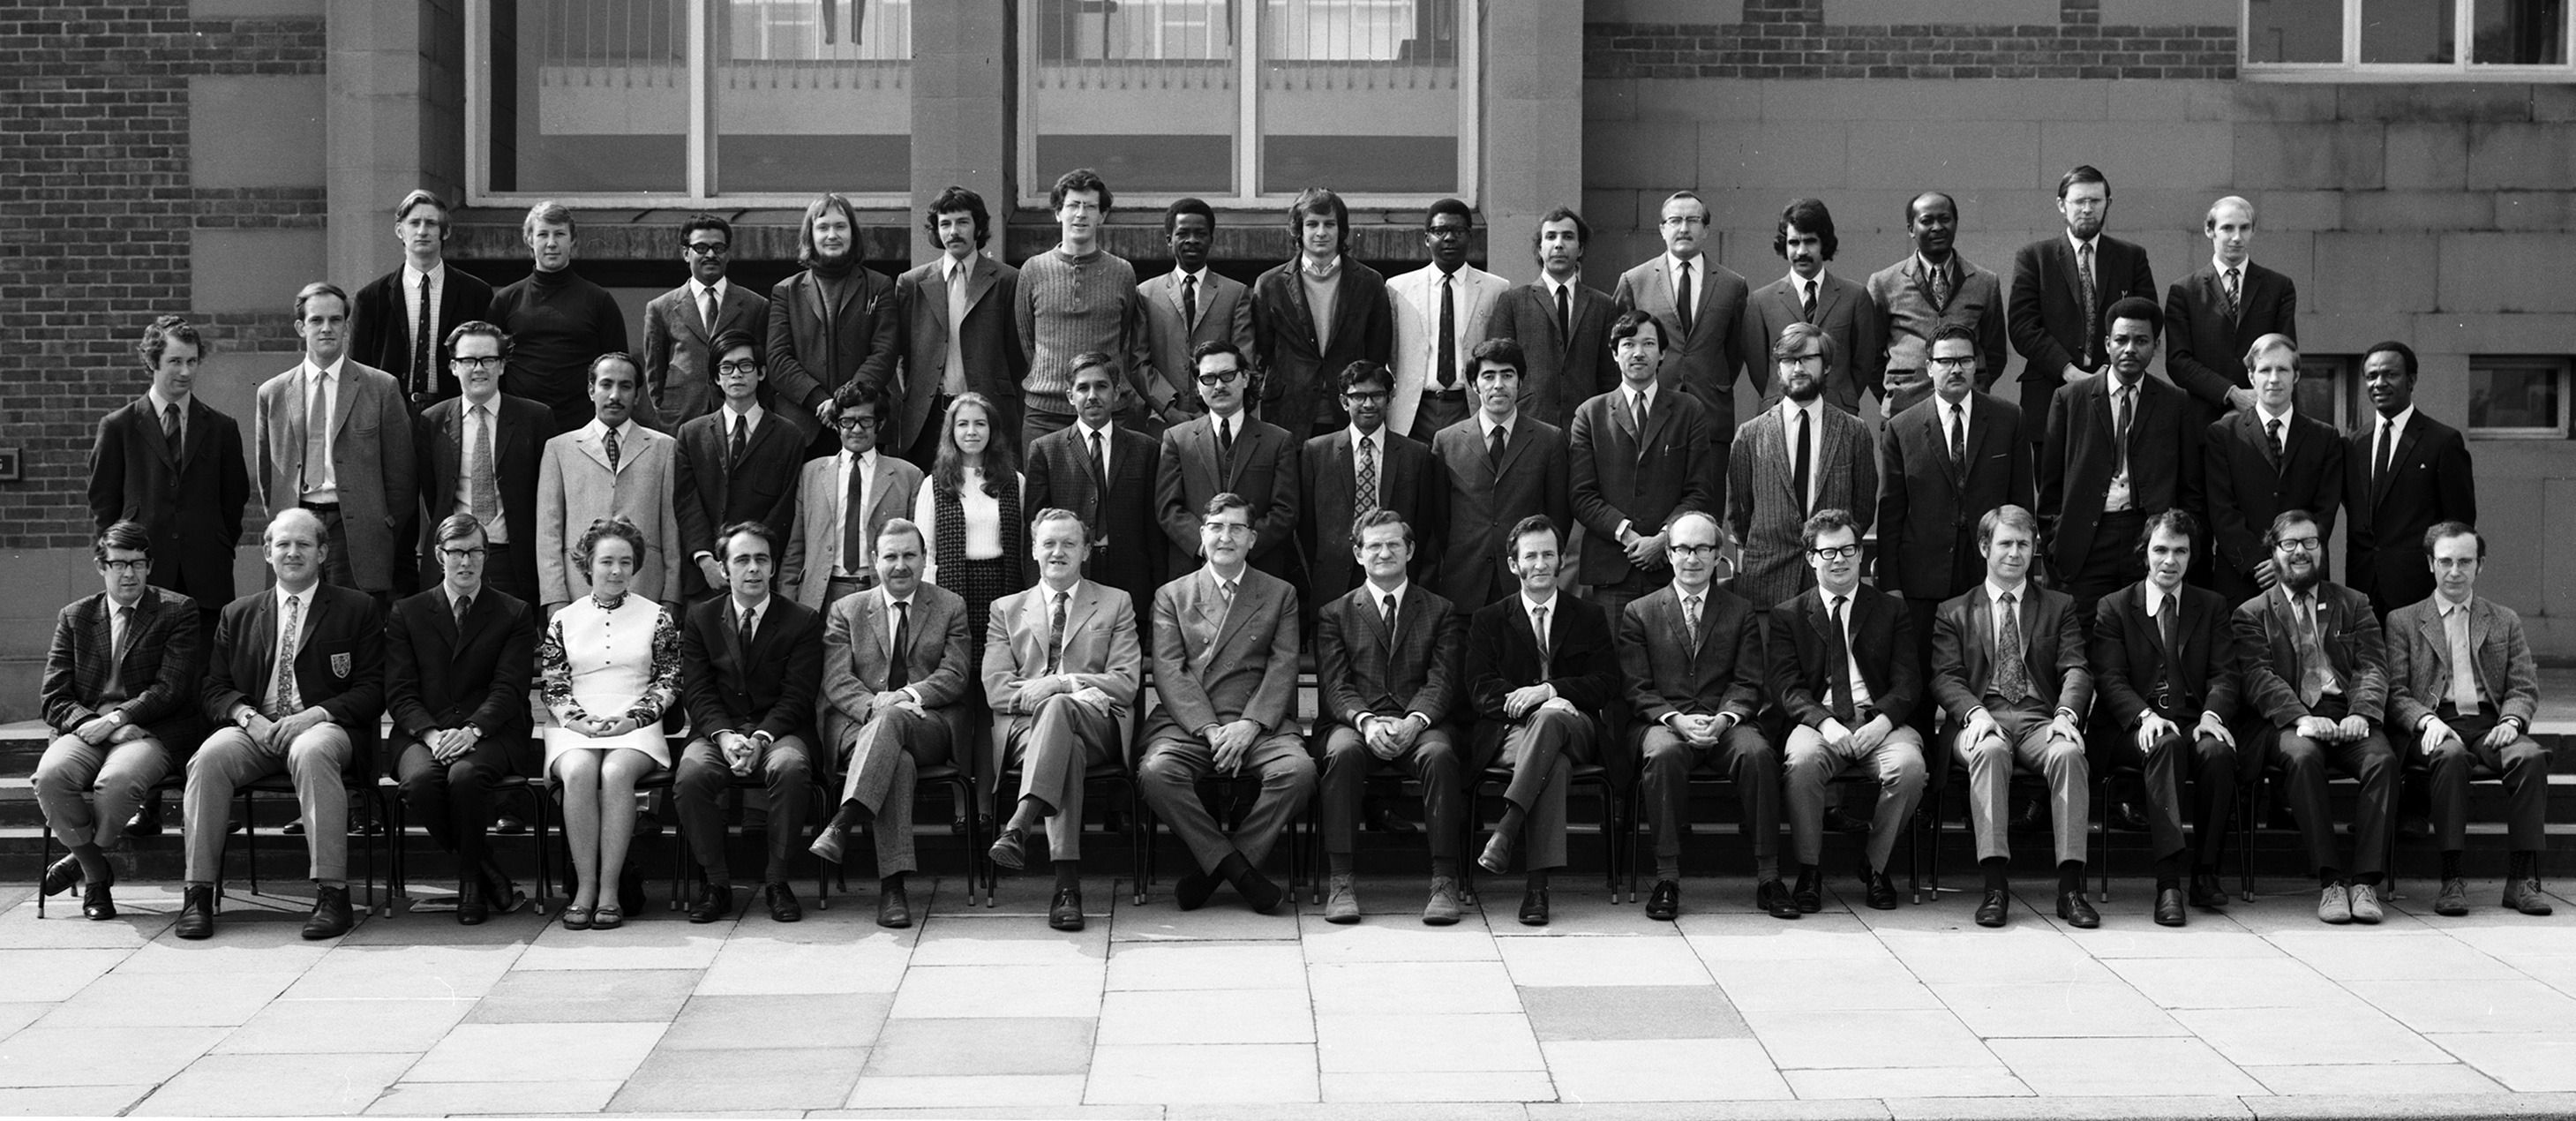 Geography Department Postgraduate Group Photo from 1972